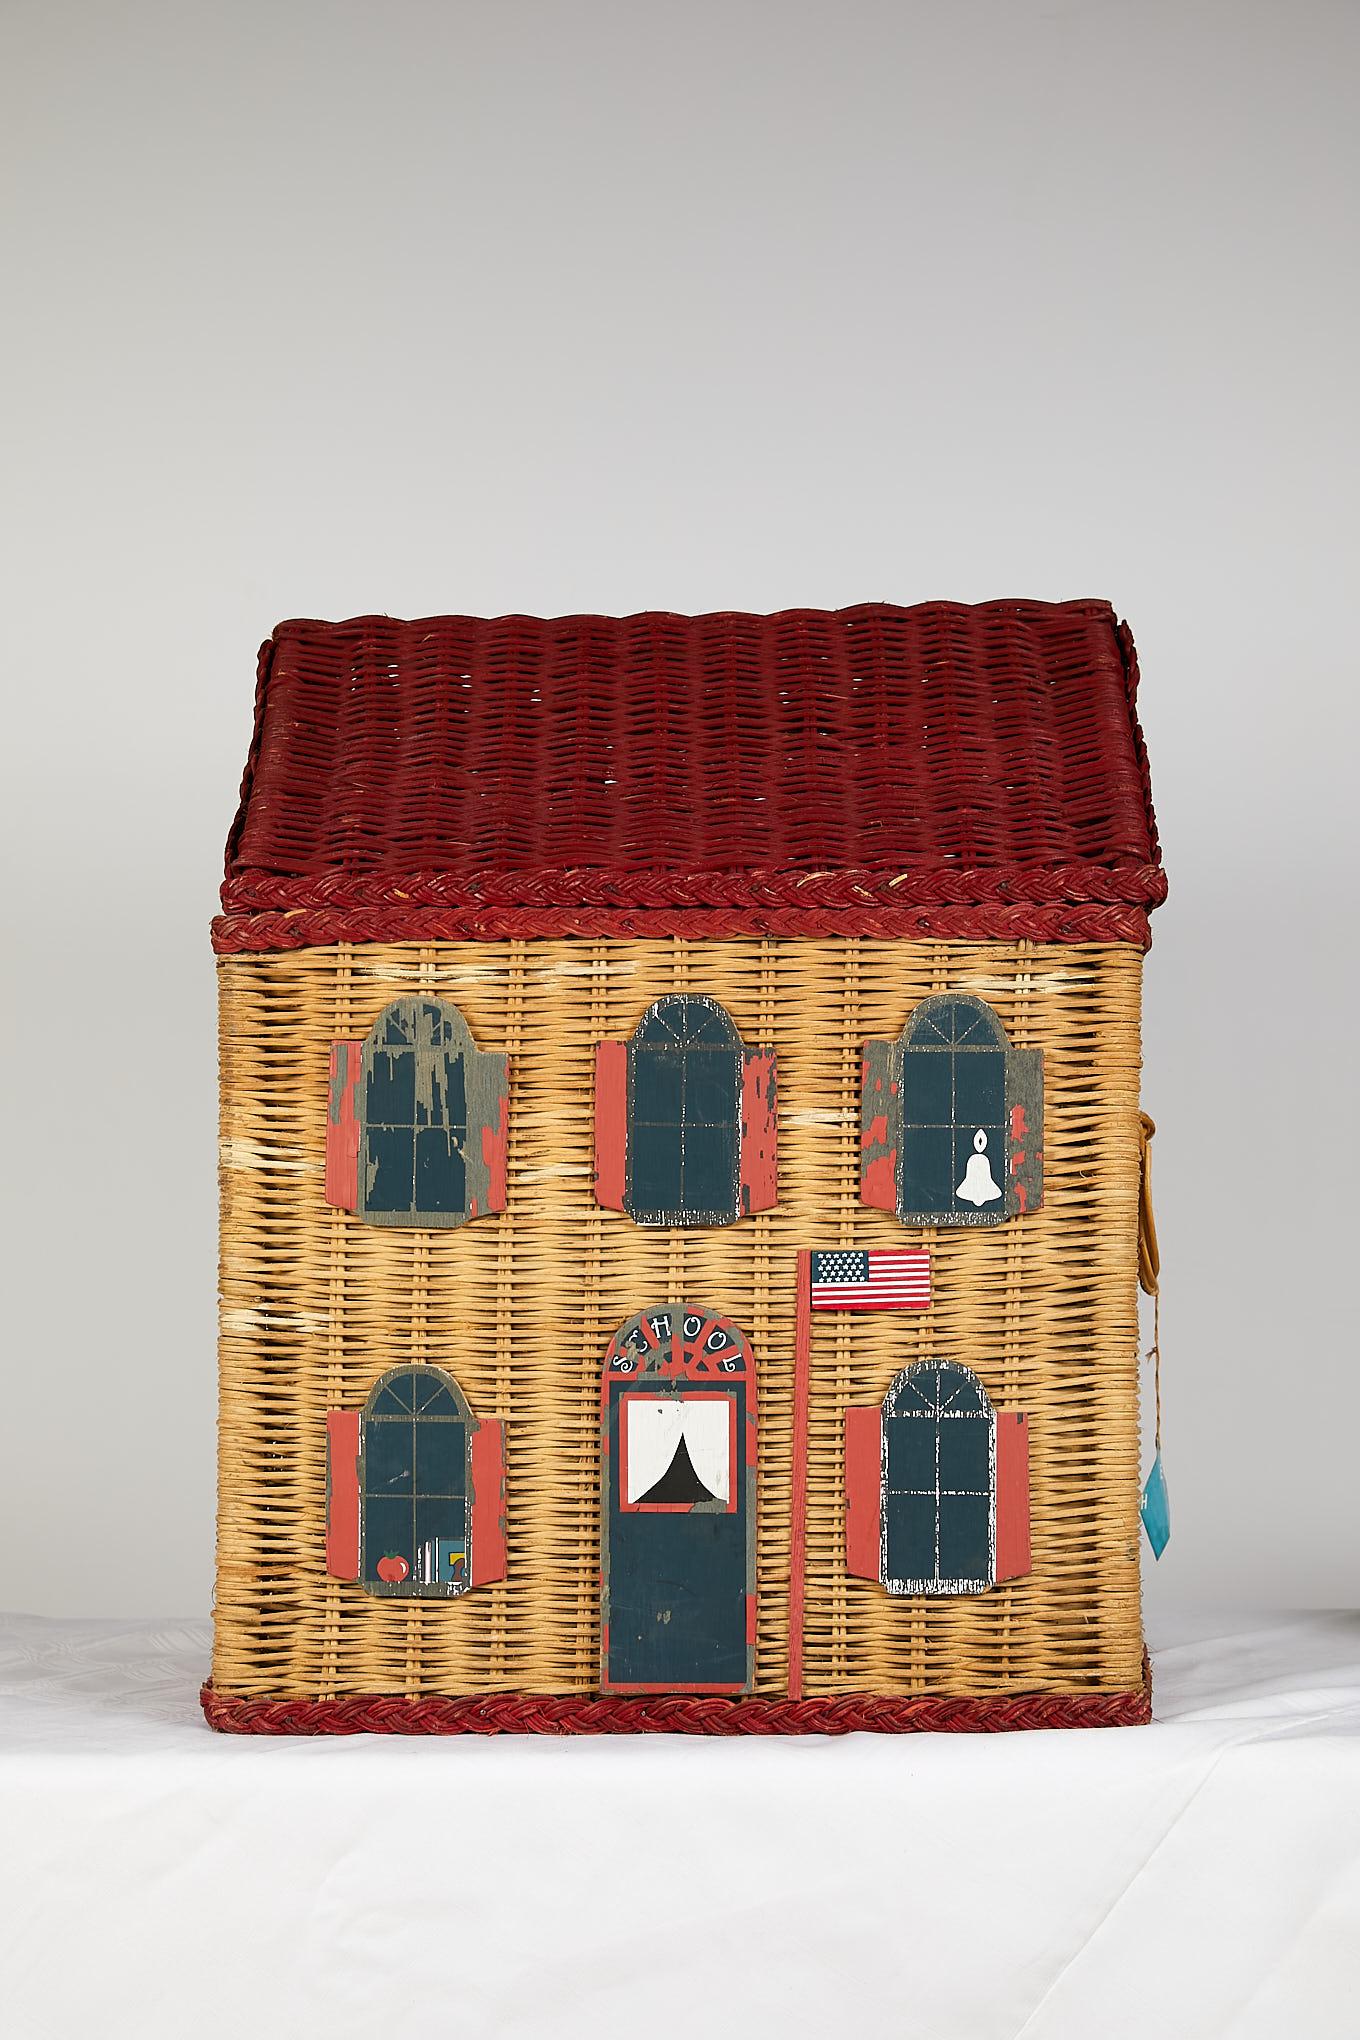 Nostalgic vintage handmade wicker toy basket in the shape of an American Colonial schoolhouse. The Classic red roof top opens on hinges to reveal storage inside and round woven handles adorn each side. The front is embellished with stylized